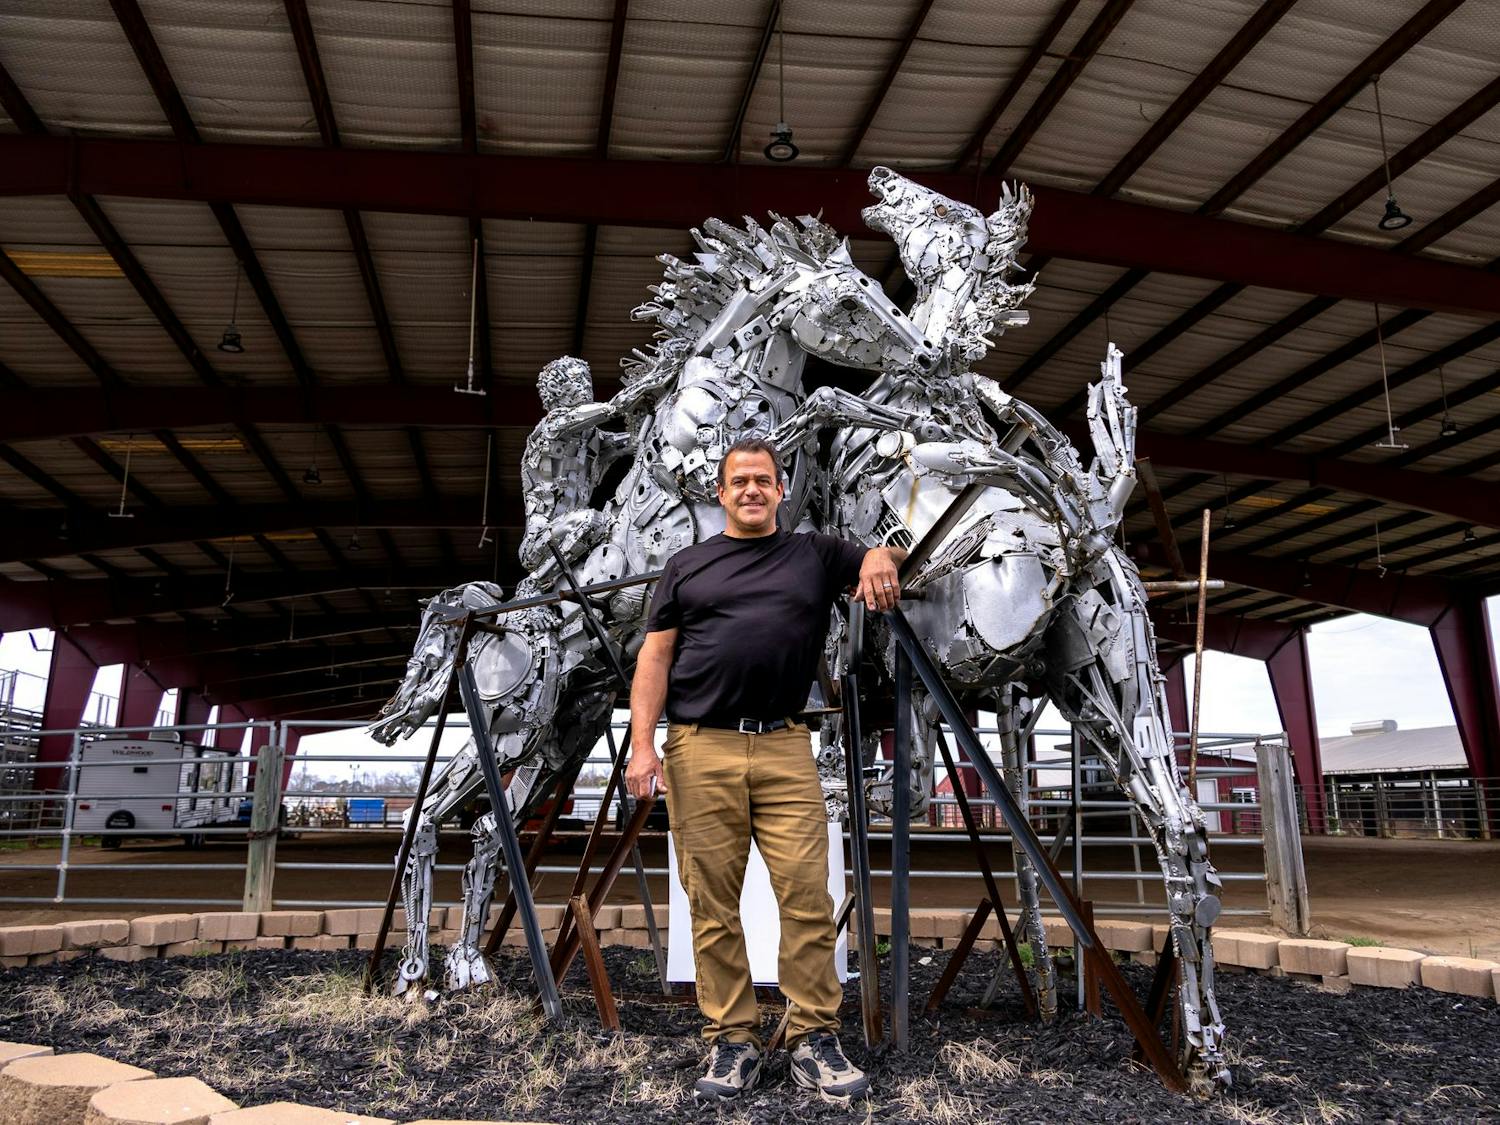 Local artist Thomas Humphries has been creating sculptures out of repurposed items since college. The medium has allowed Humphries to express passion through welding found materials into art, he said. Humphries' work can be found at the Riverbanks Zoo and Garden, South Carolina State Fairgrounds, West Columbia Riverwalk and other spaces throughout Columbia.